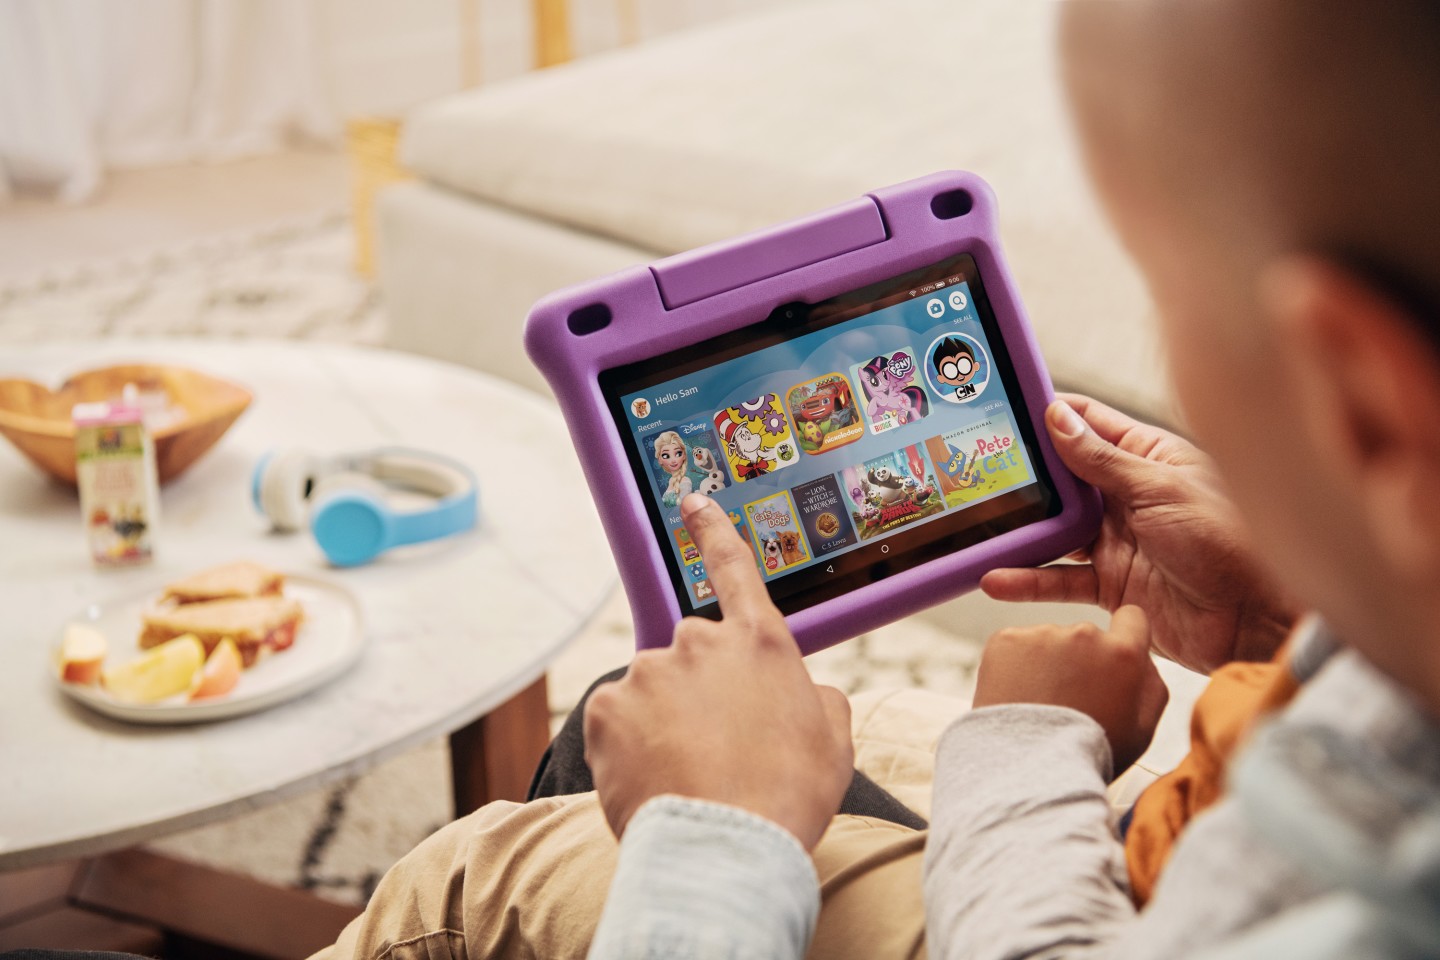 The Fire HD 8 Kids Edition comes with a colorful protective case with built-in kickstand